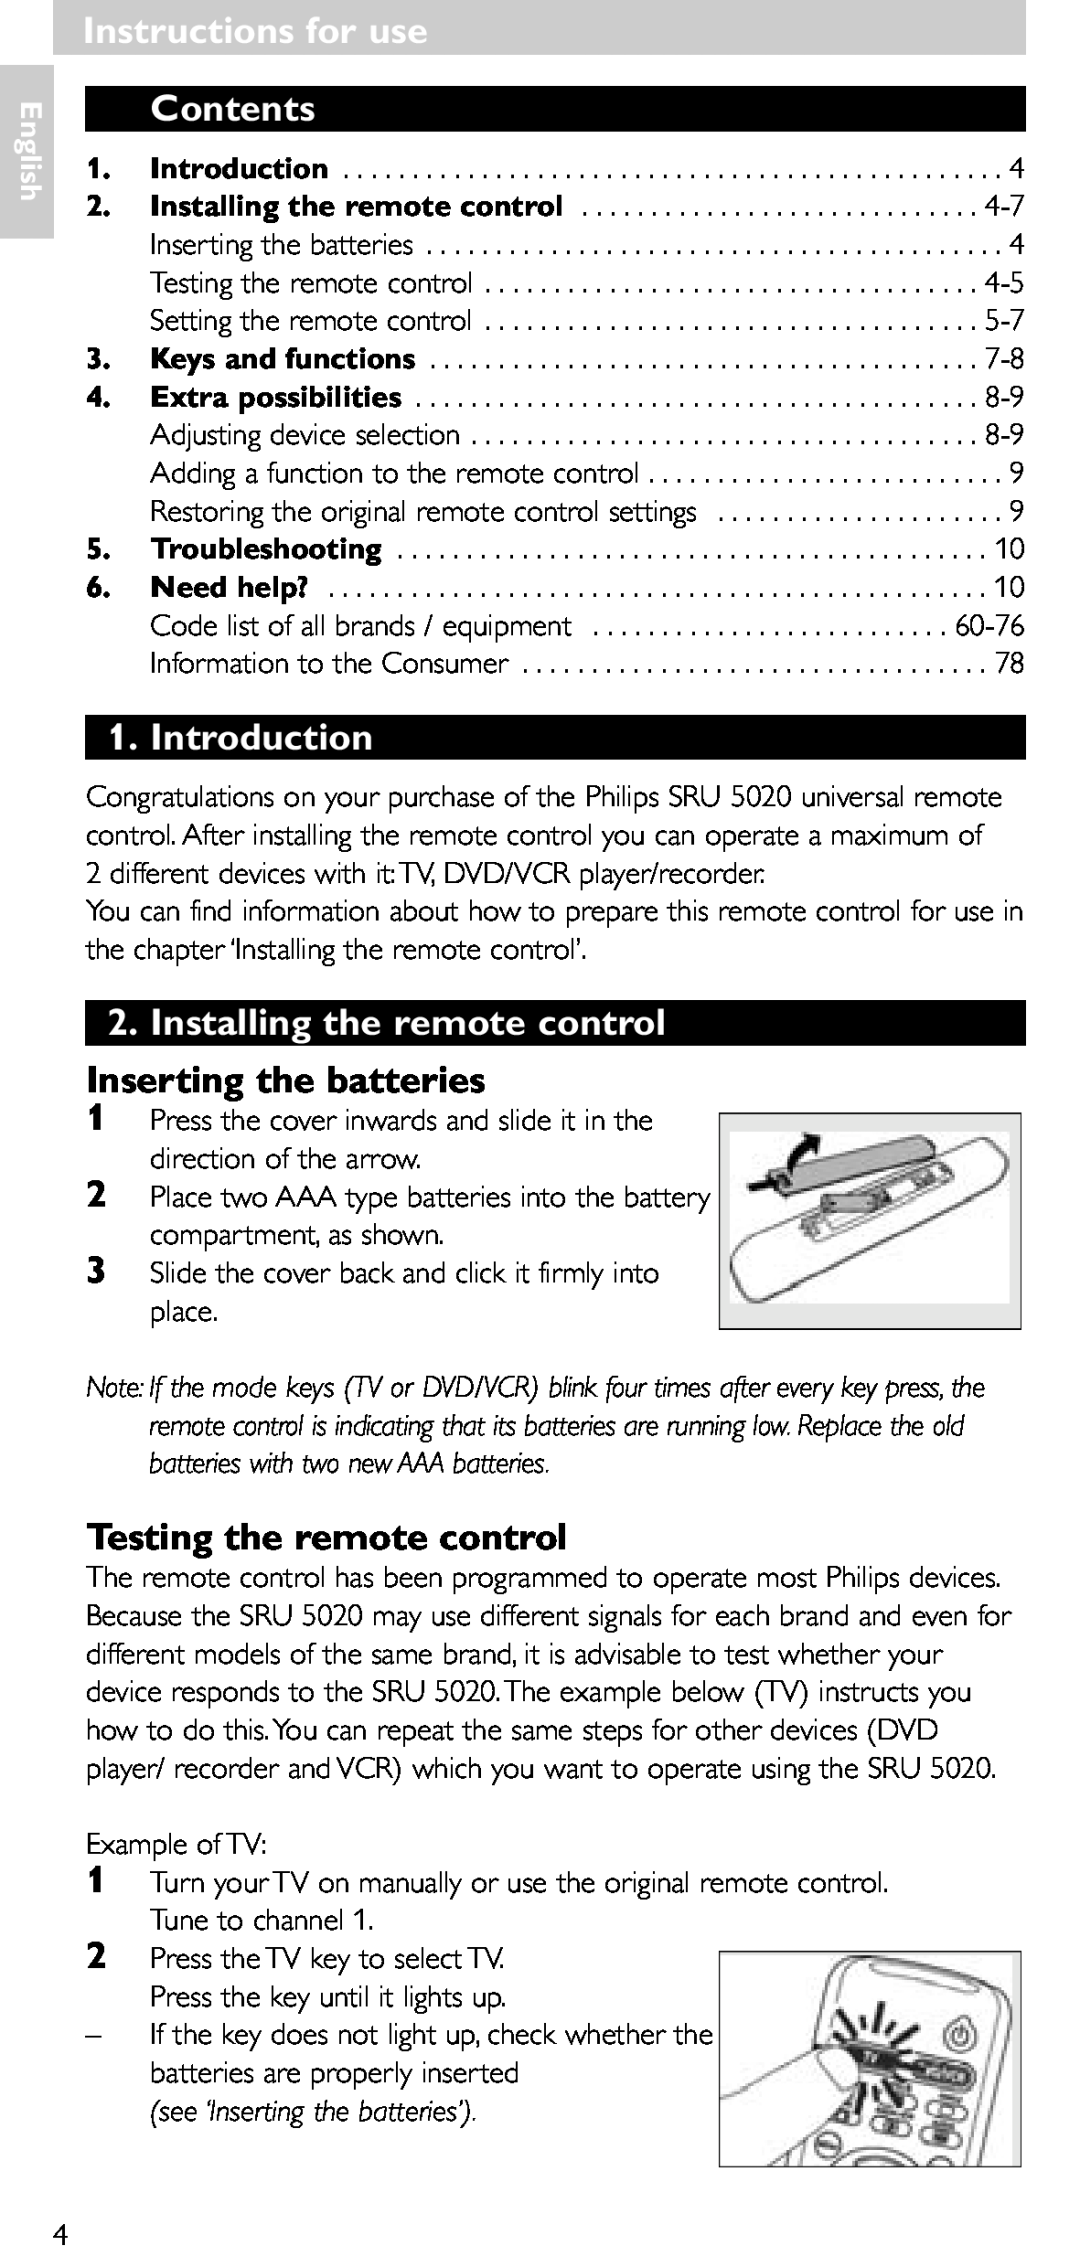 Philips SRU 5020/86 Instructions for use, Contents, Introduction, Installing the remote control, Inserting the batteries 